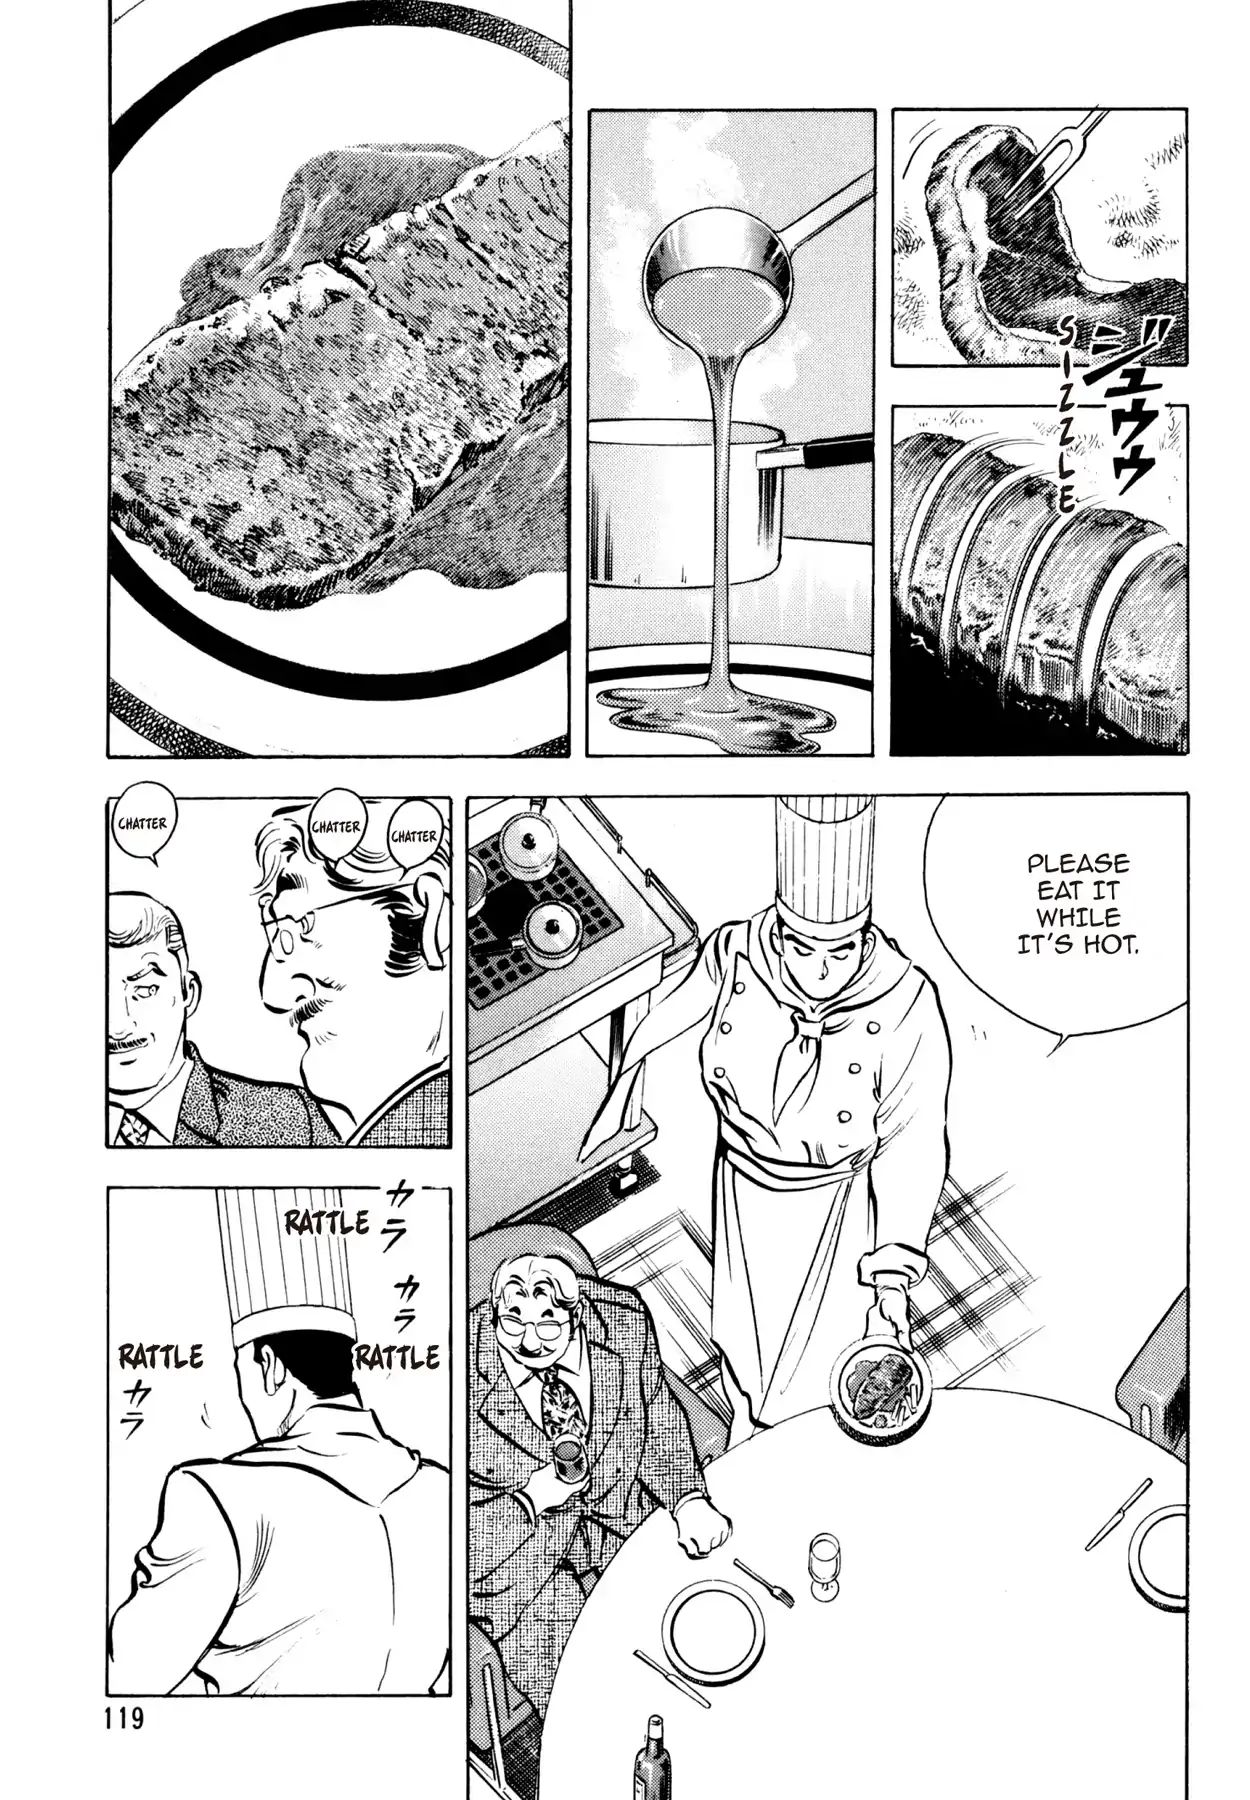 Shoku King VOL.10 CHAPTER 85: THE DIFFERENCE IS IN THE INGREDIENTS